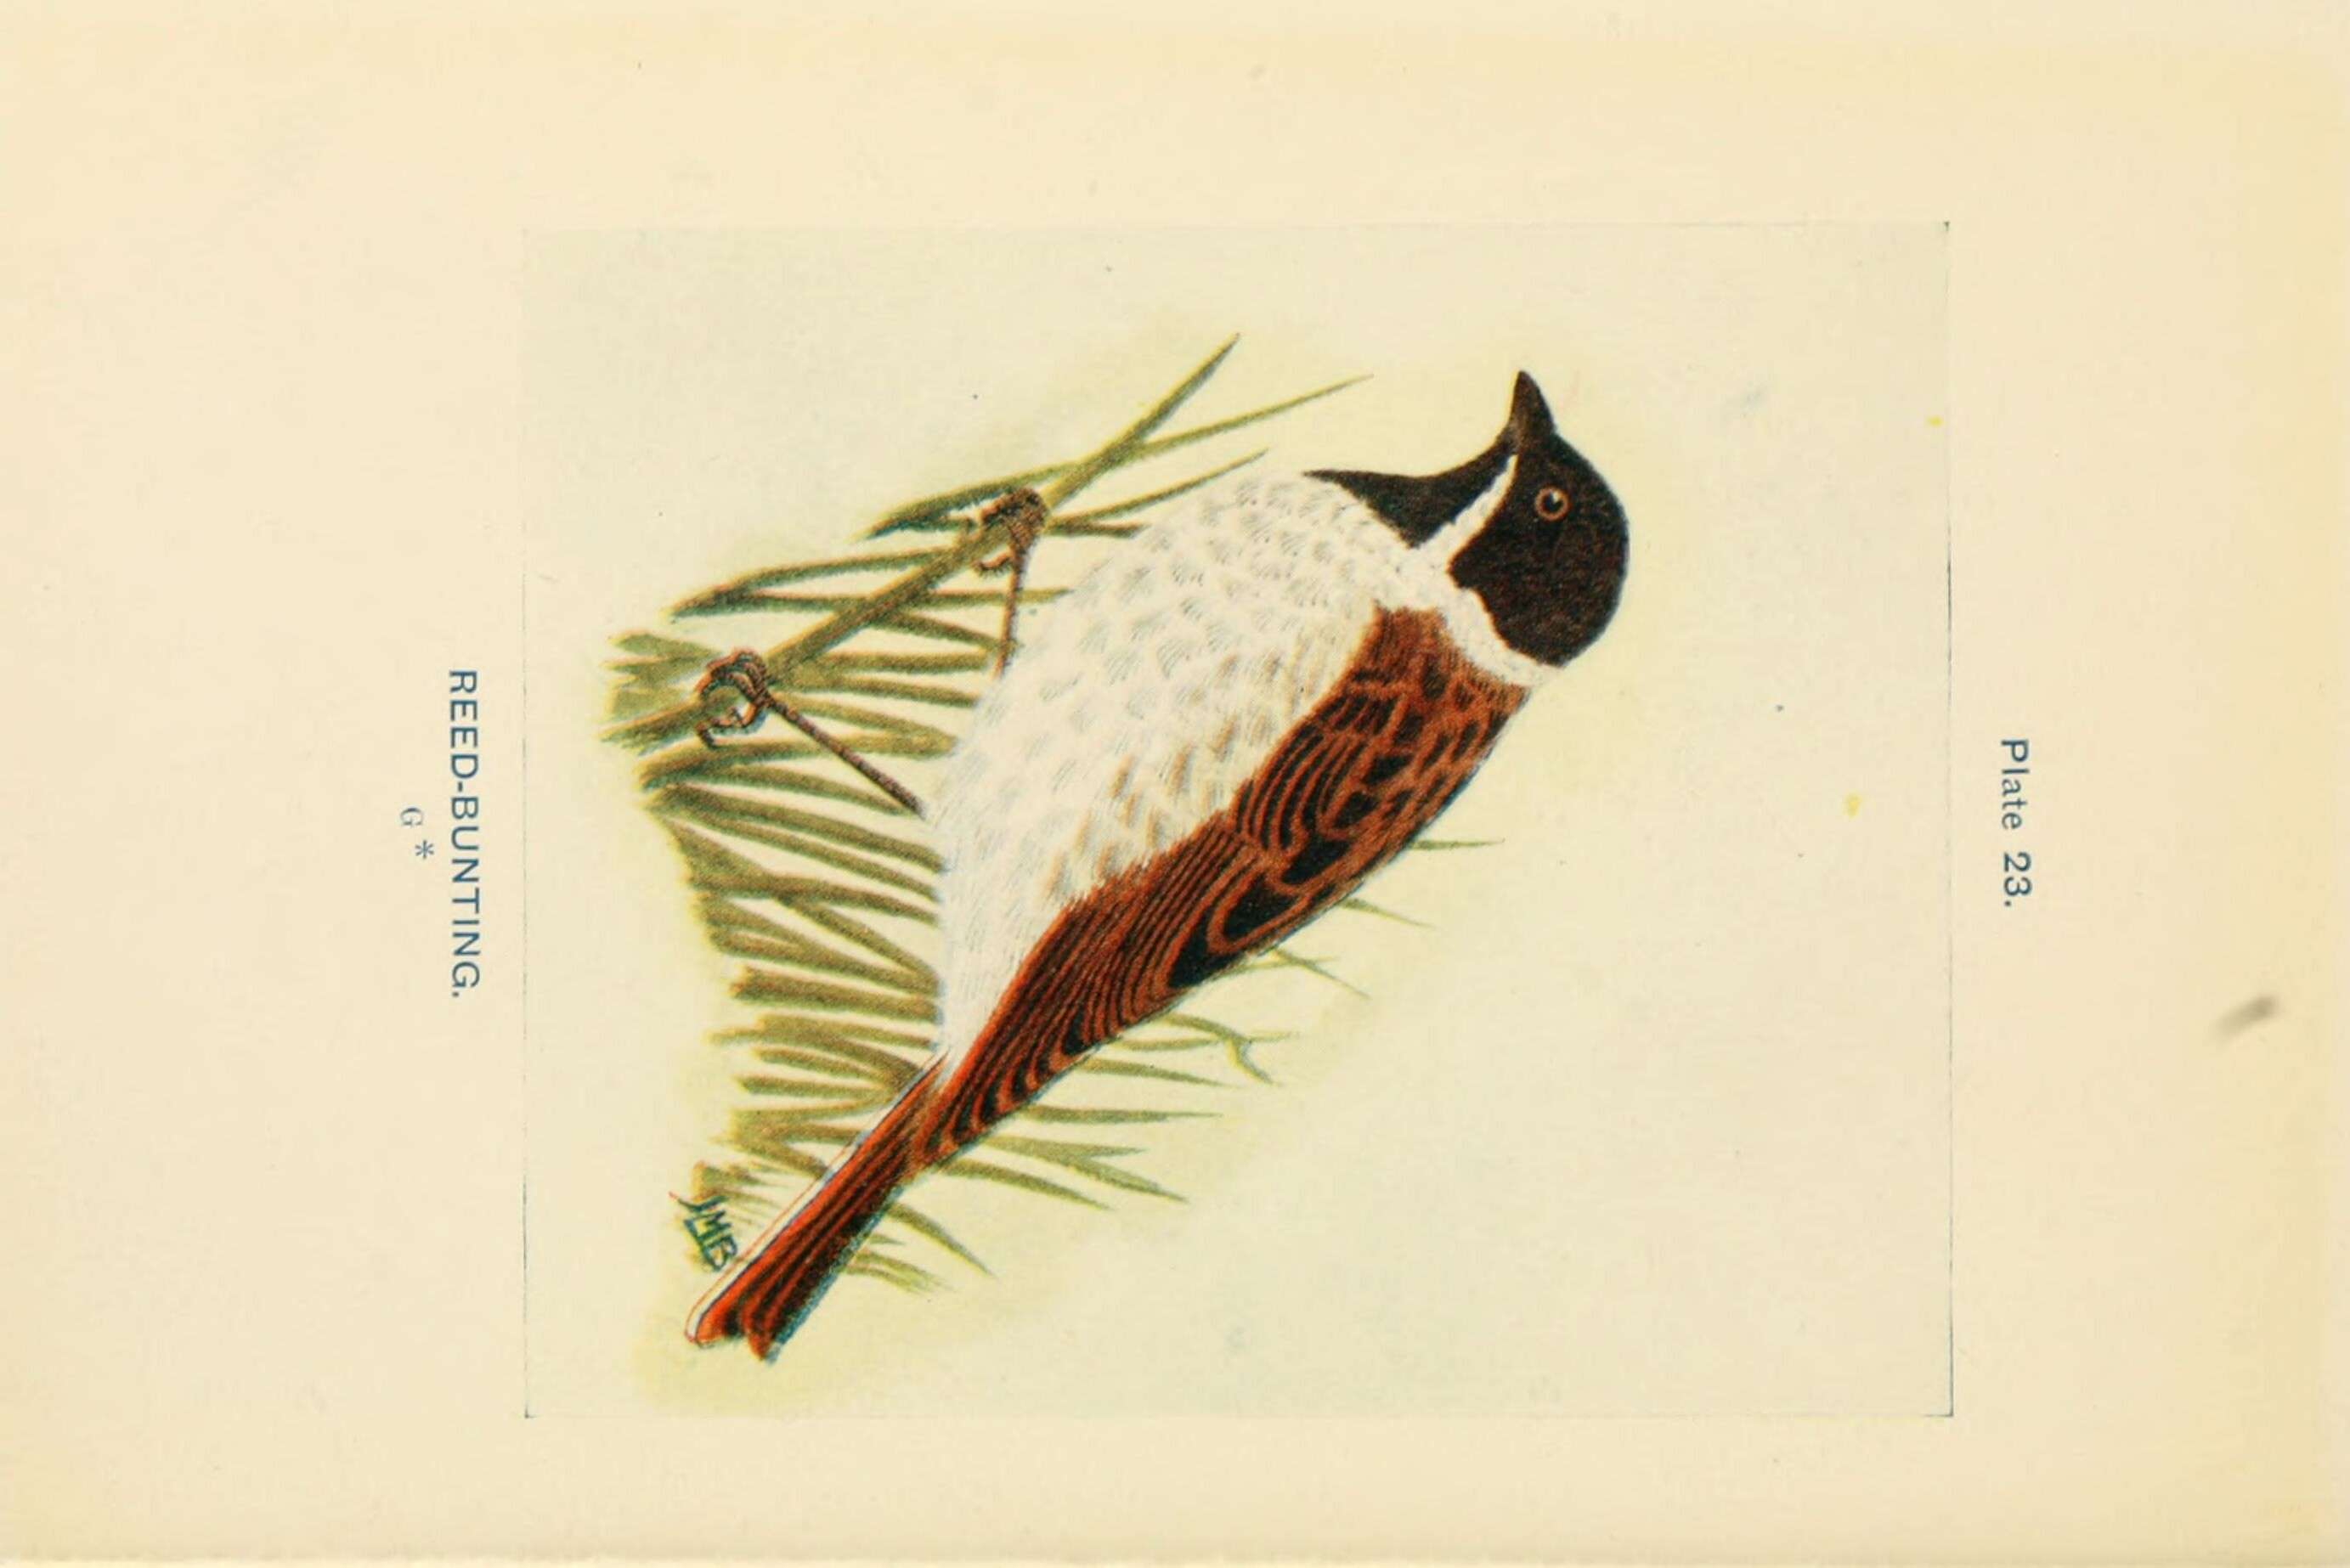 Image of Common Reed Bunting